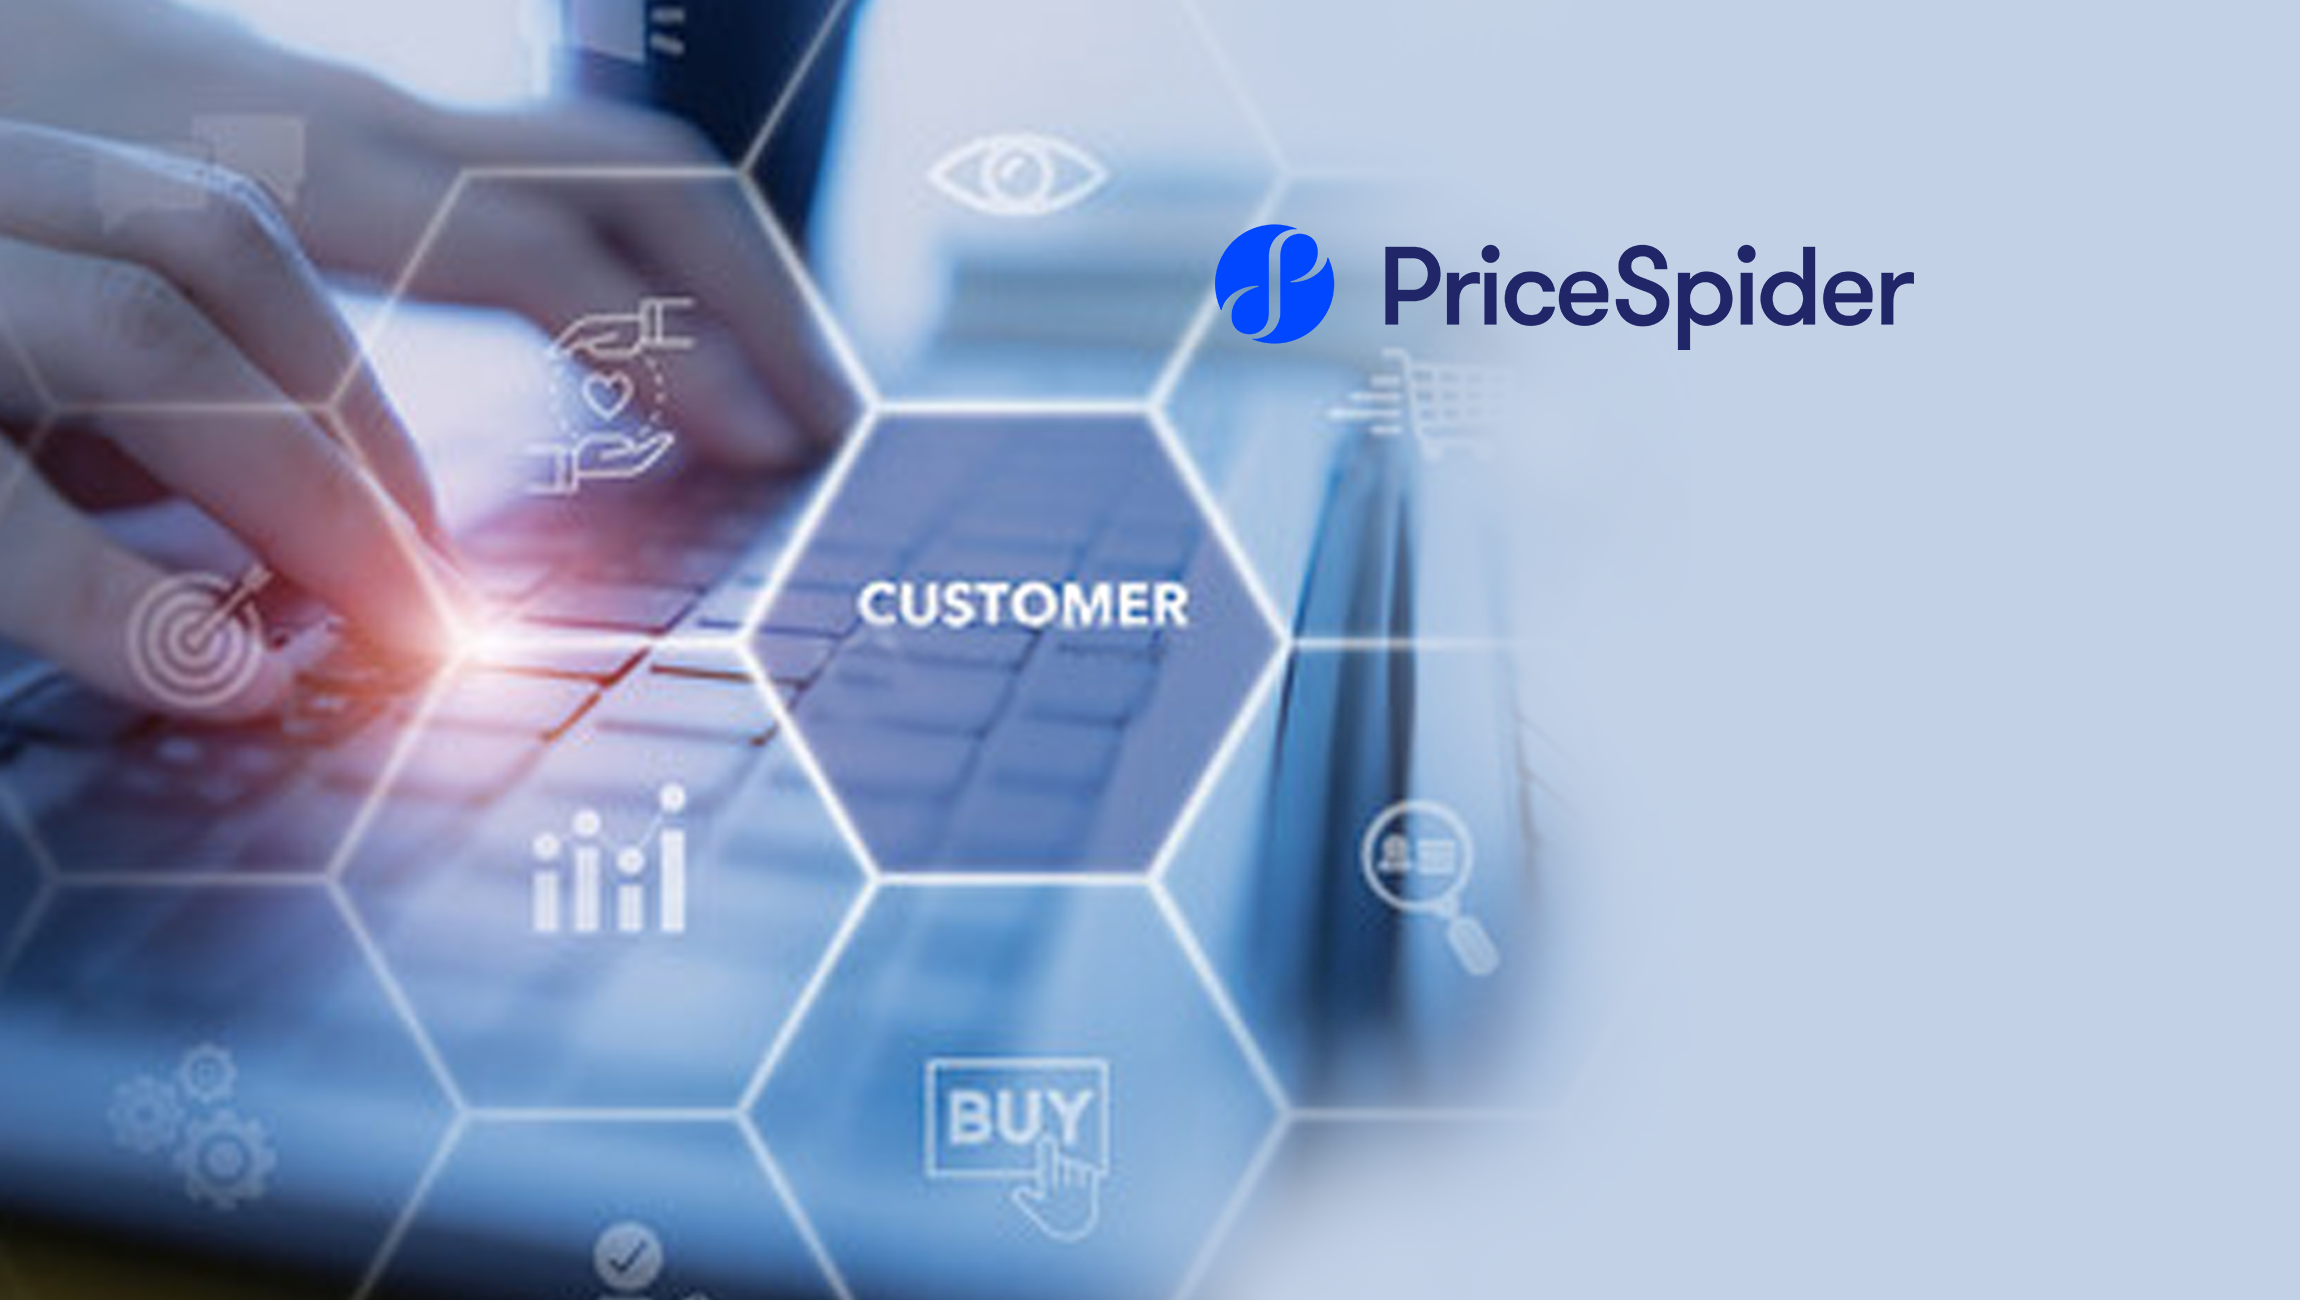 PriceSpider-to-Launch-AI-Powered-Functionality-to-Help-Brands-Optimize-Customer-Journey-and-Drive-Sales